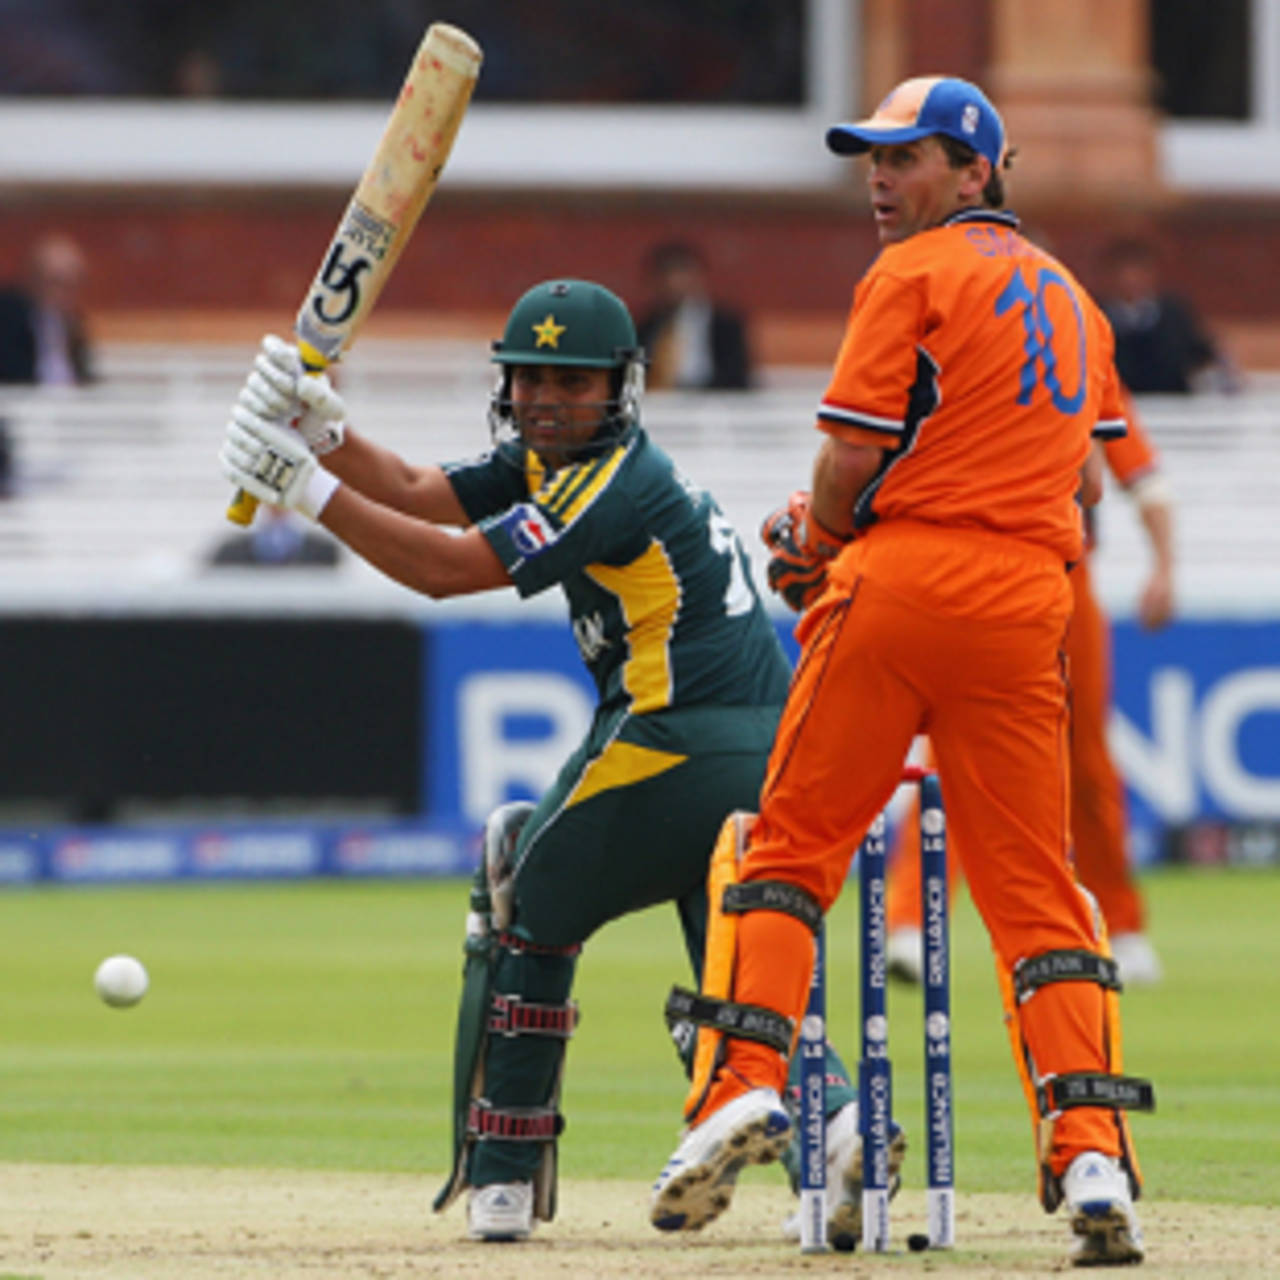 With bat and with glove, Kamran Akmal had a field day&nbsp;&nbsp;&bull;&nbsp;&nbsp;Getty Images